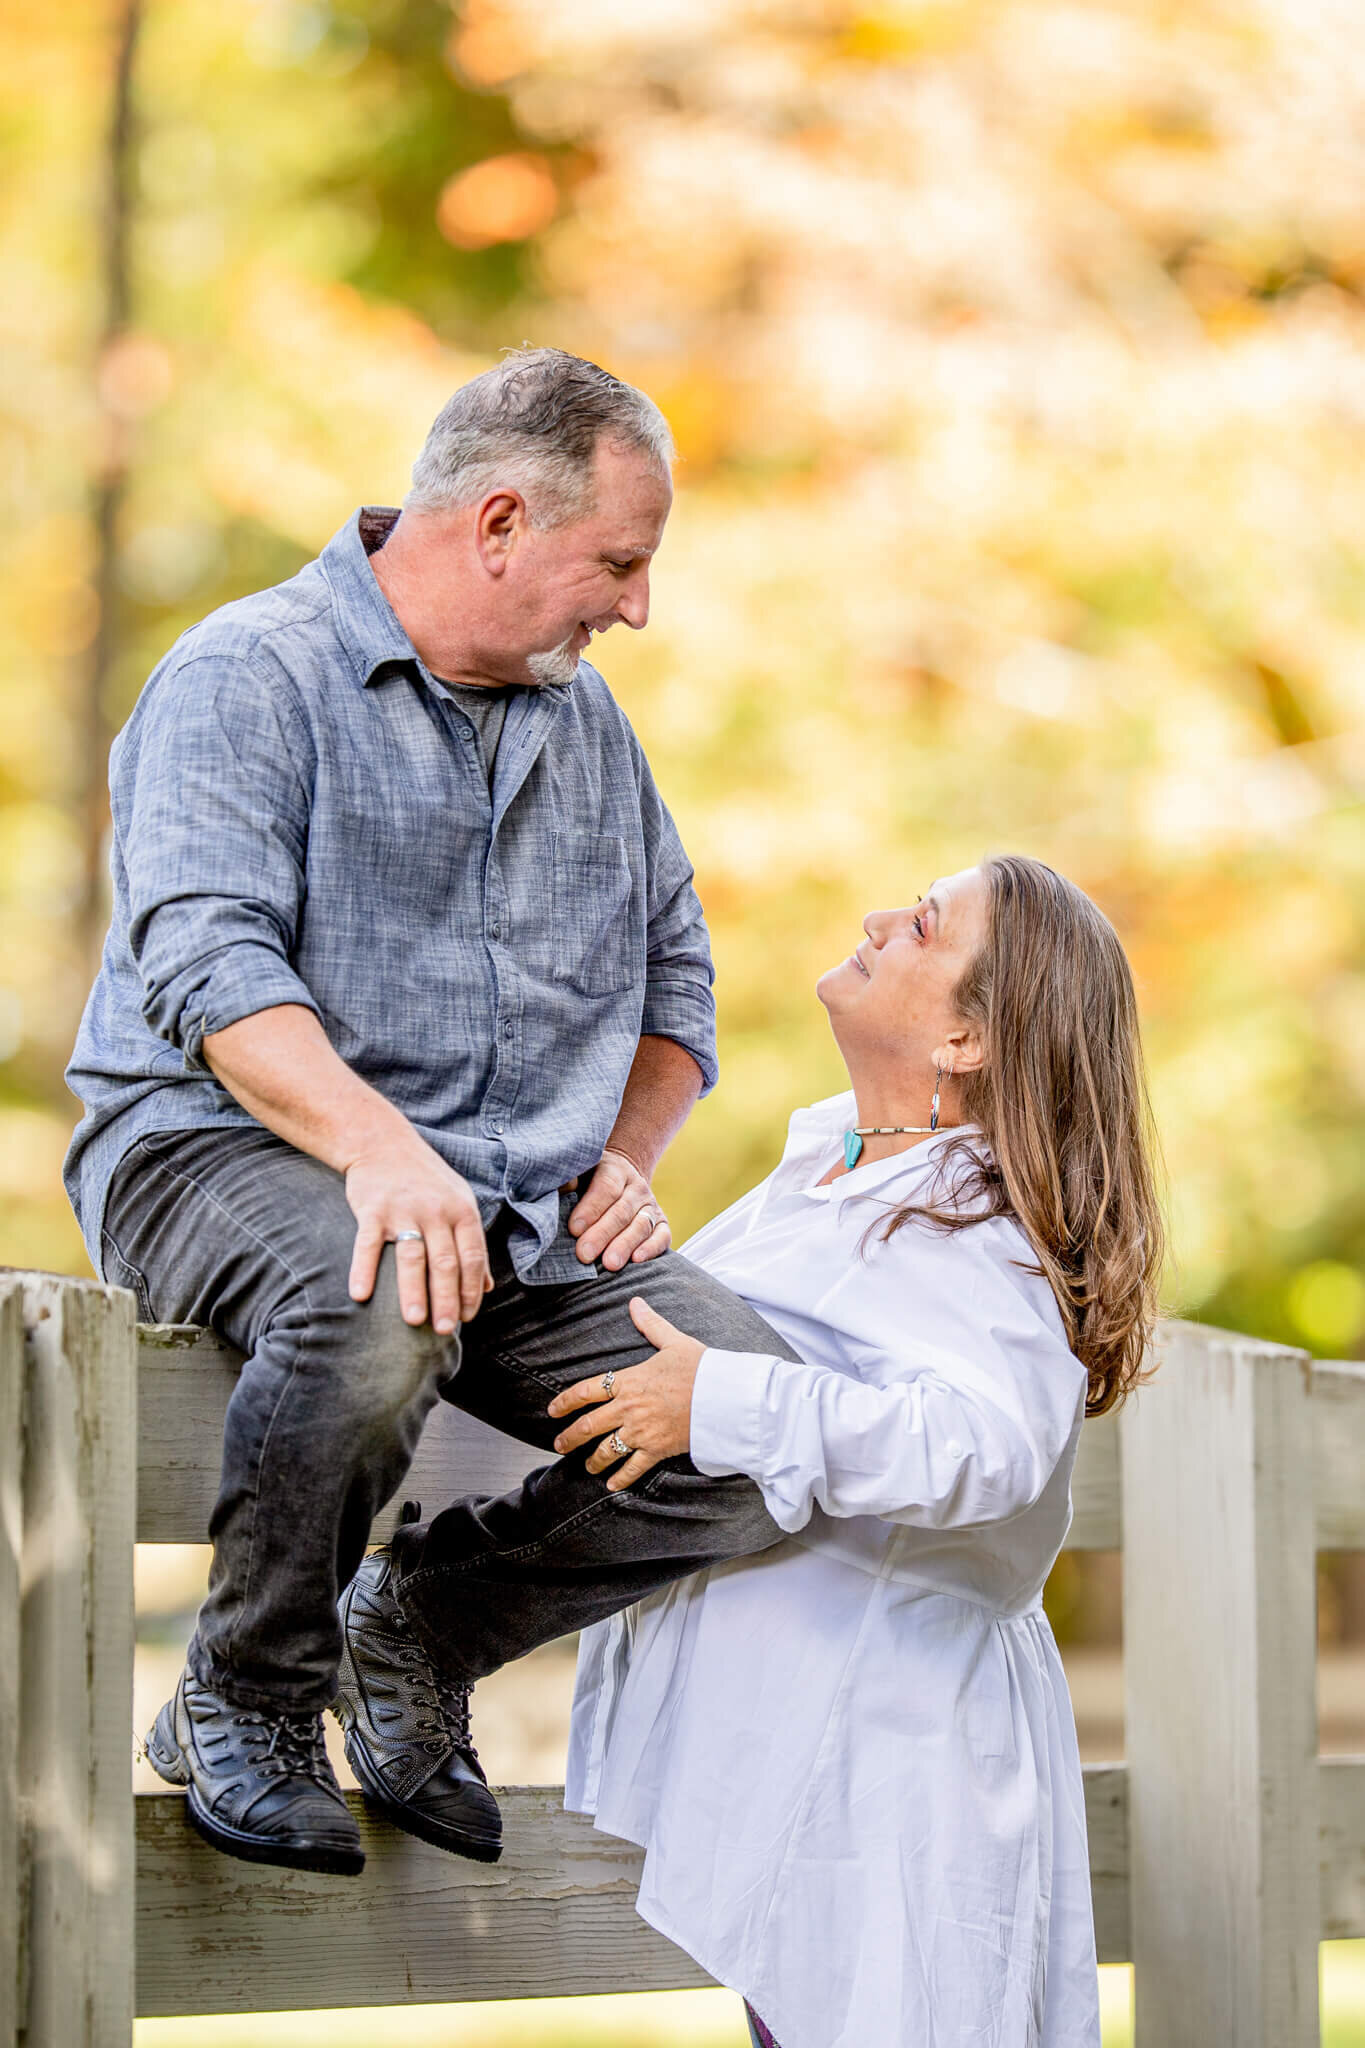 Couples photo of a male sitting on a fence weraing blue and black looking down at his wife who is standing up and looking up at him